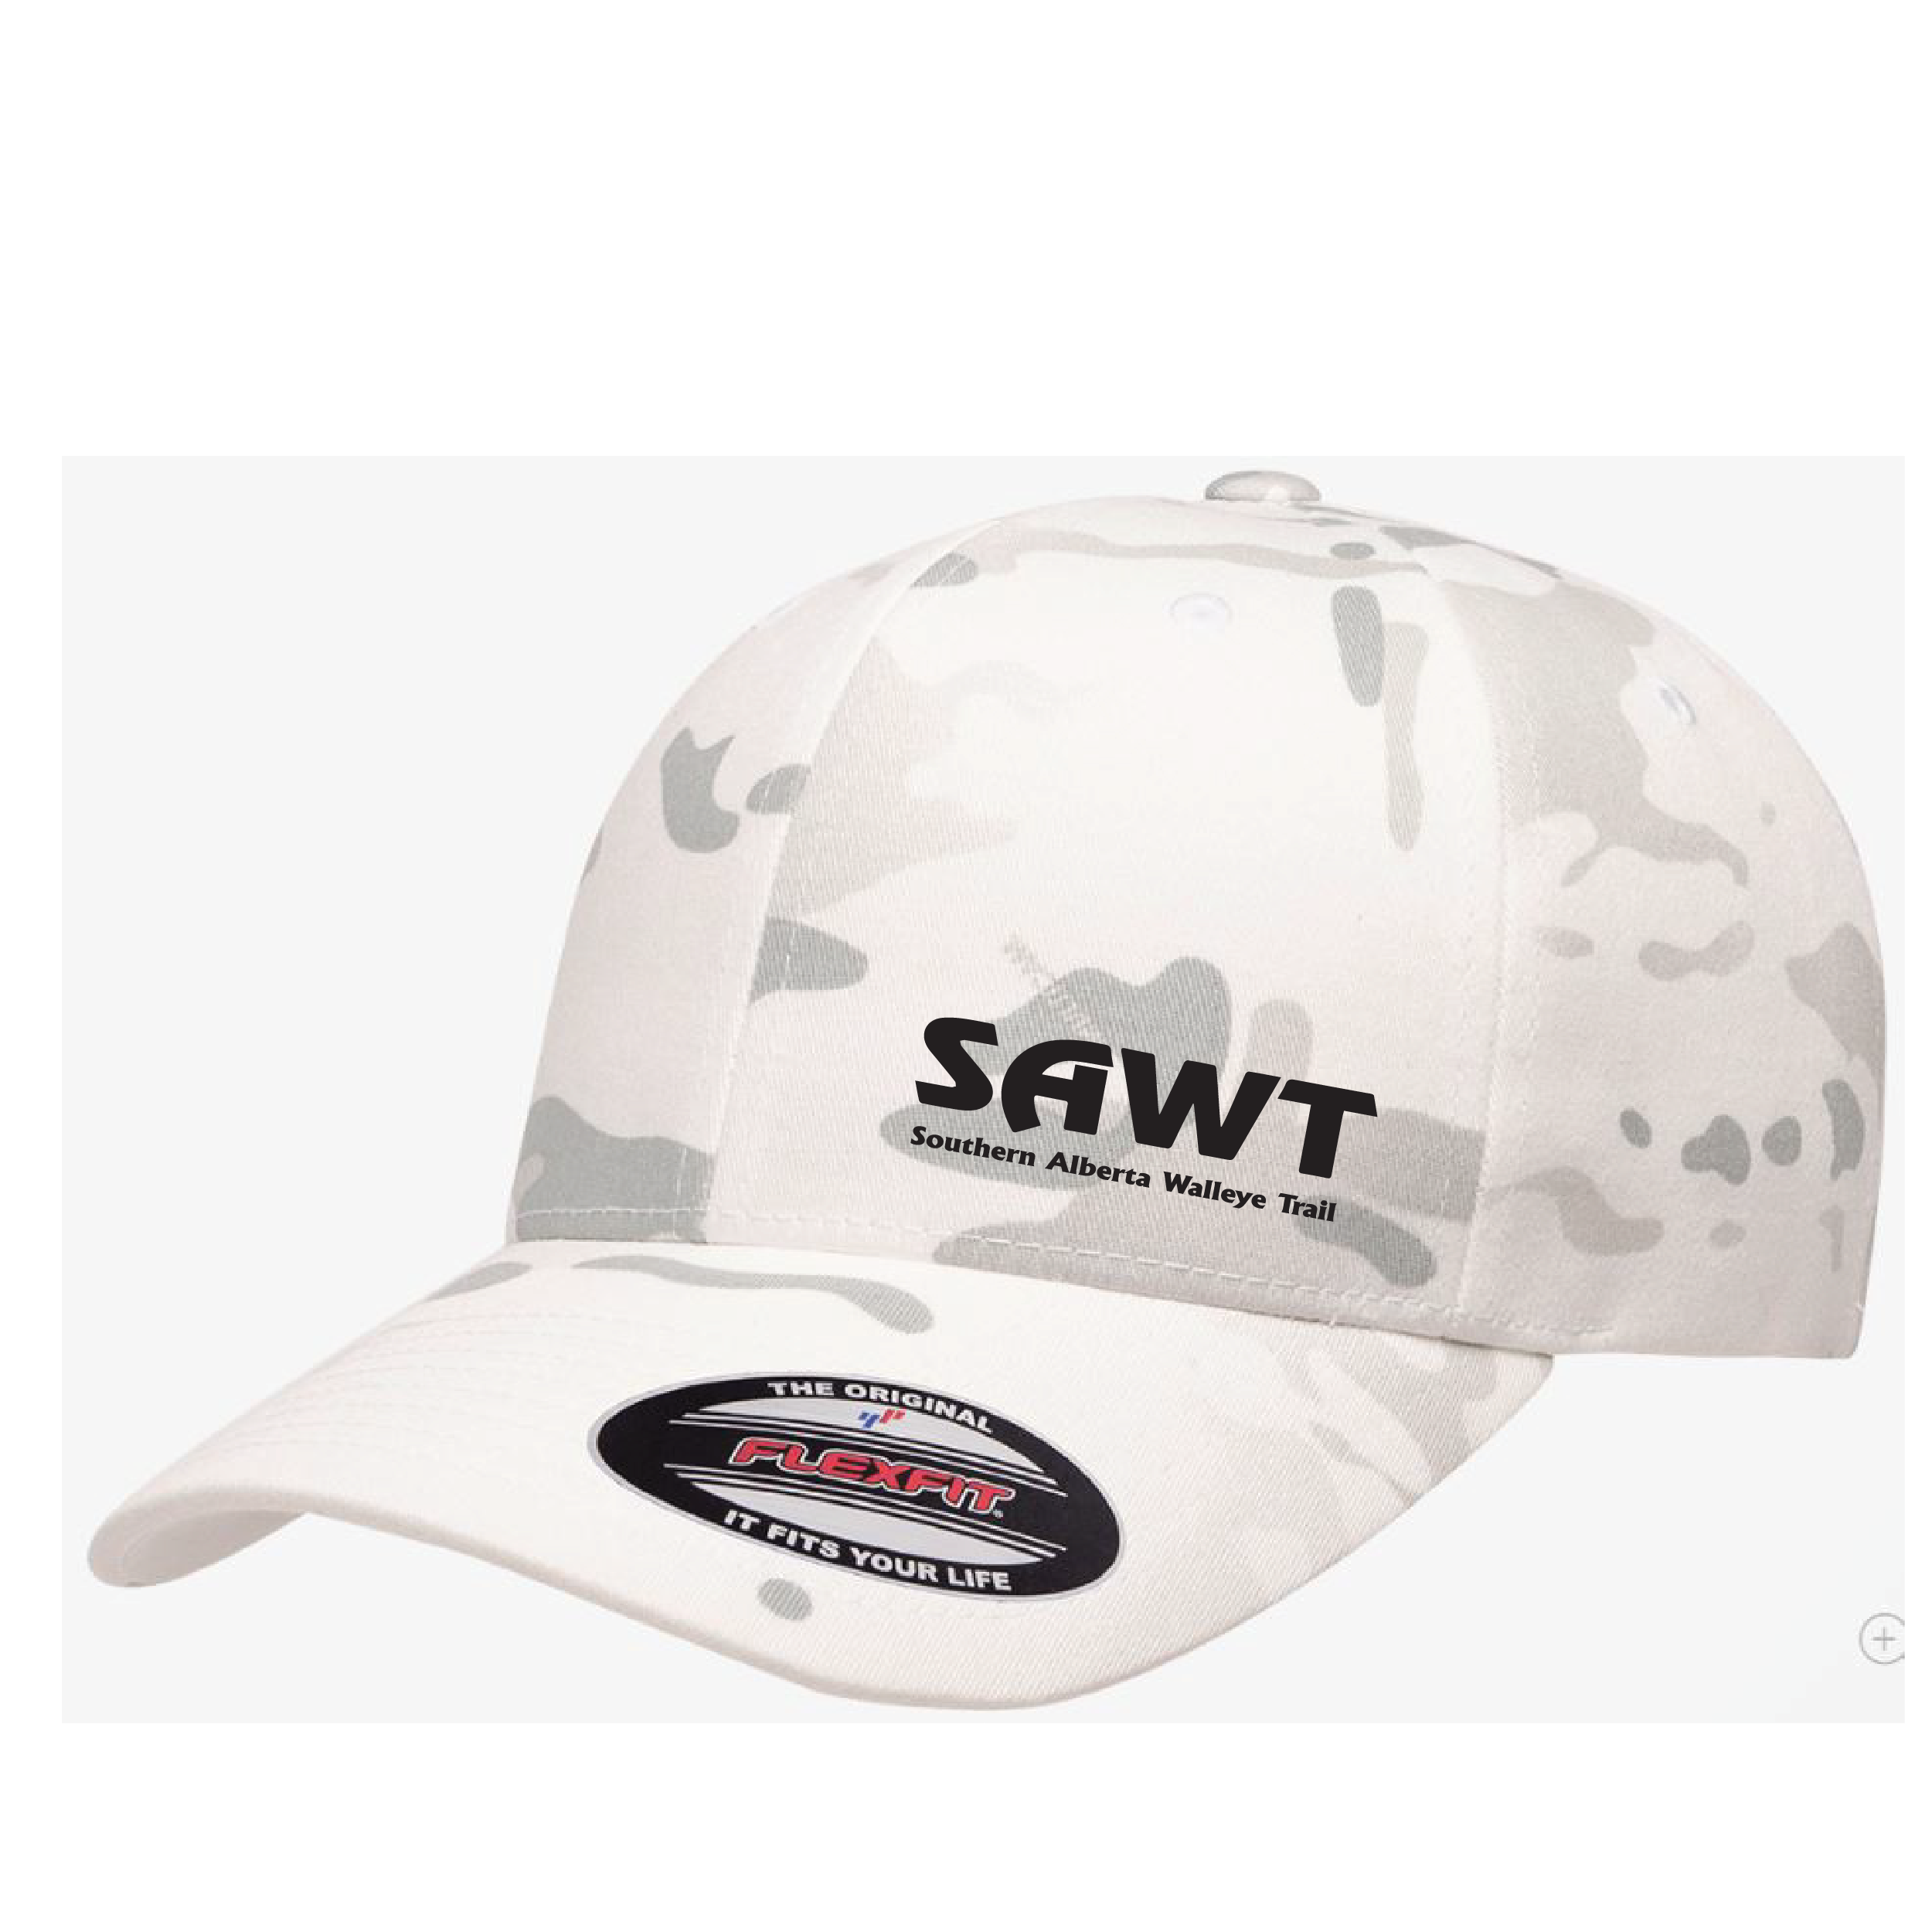 SAWT Southern Alberta Walleye Trail Flexfit Hat, Black & Alpine, Two Sizes  available. Stitched with the SAWT lettering.